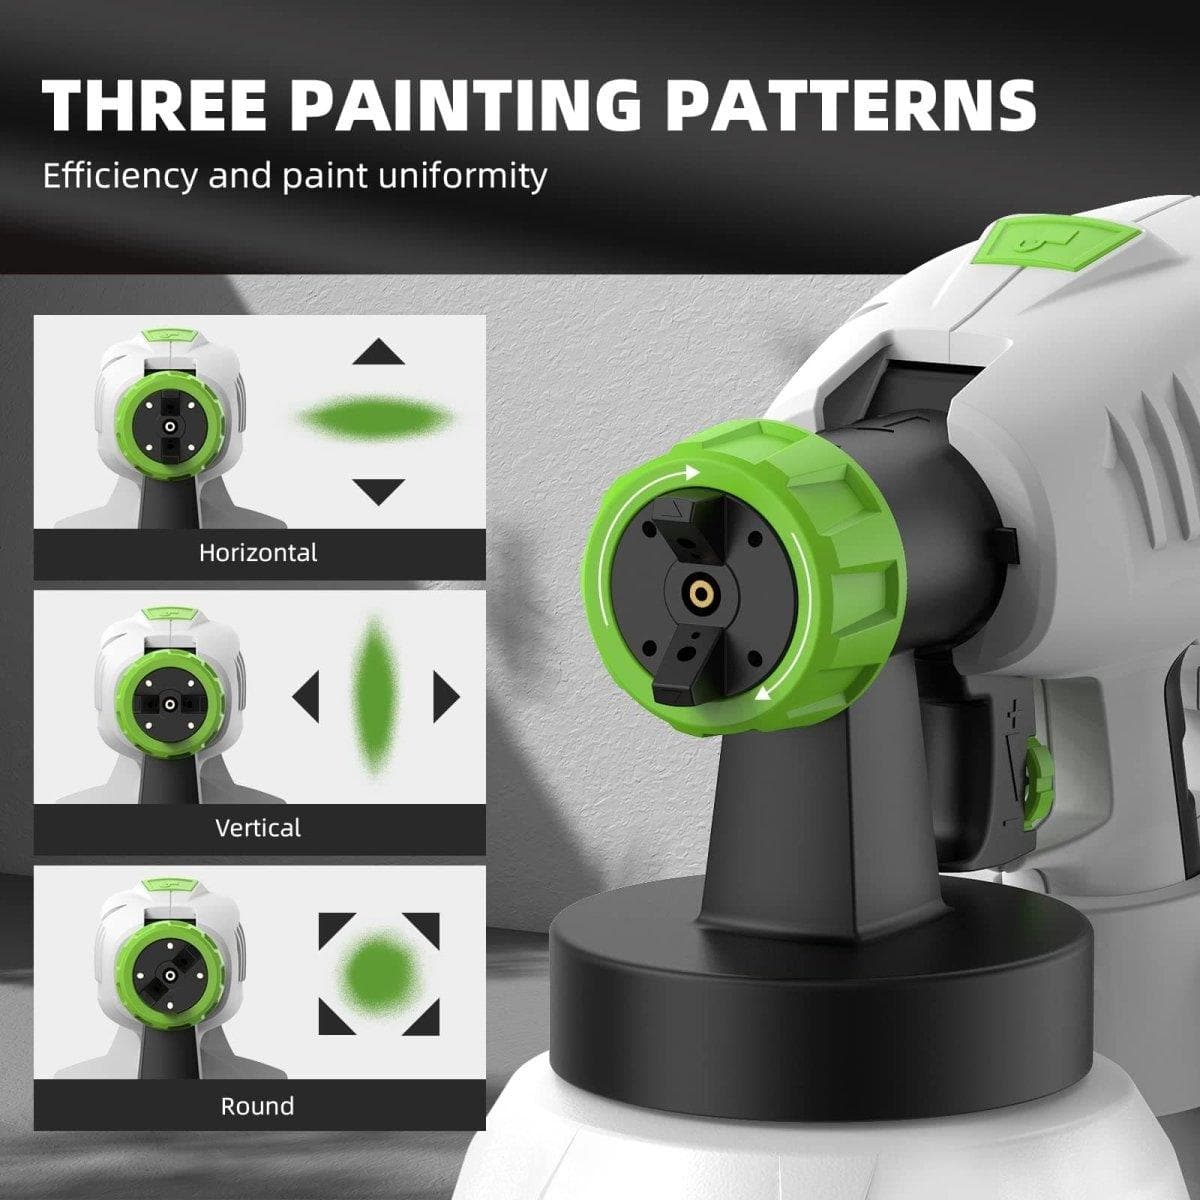 Huepar Tools SG800 HVLP electric paint sprayer with 4 metal nozzles and 3 patterns, ideal for home interior and exterior walls, house painting, ceiling, fence, cabinet, chair4